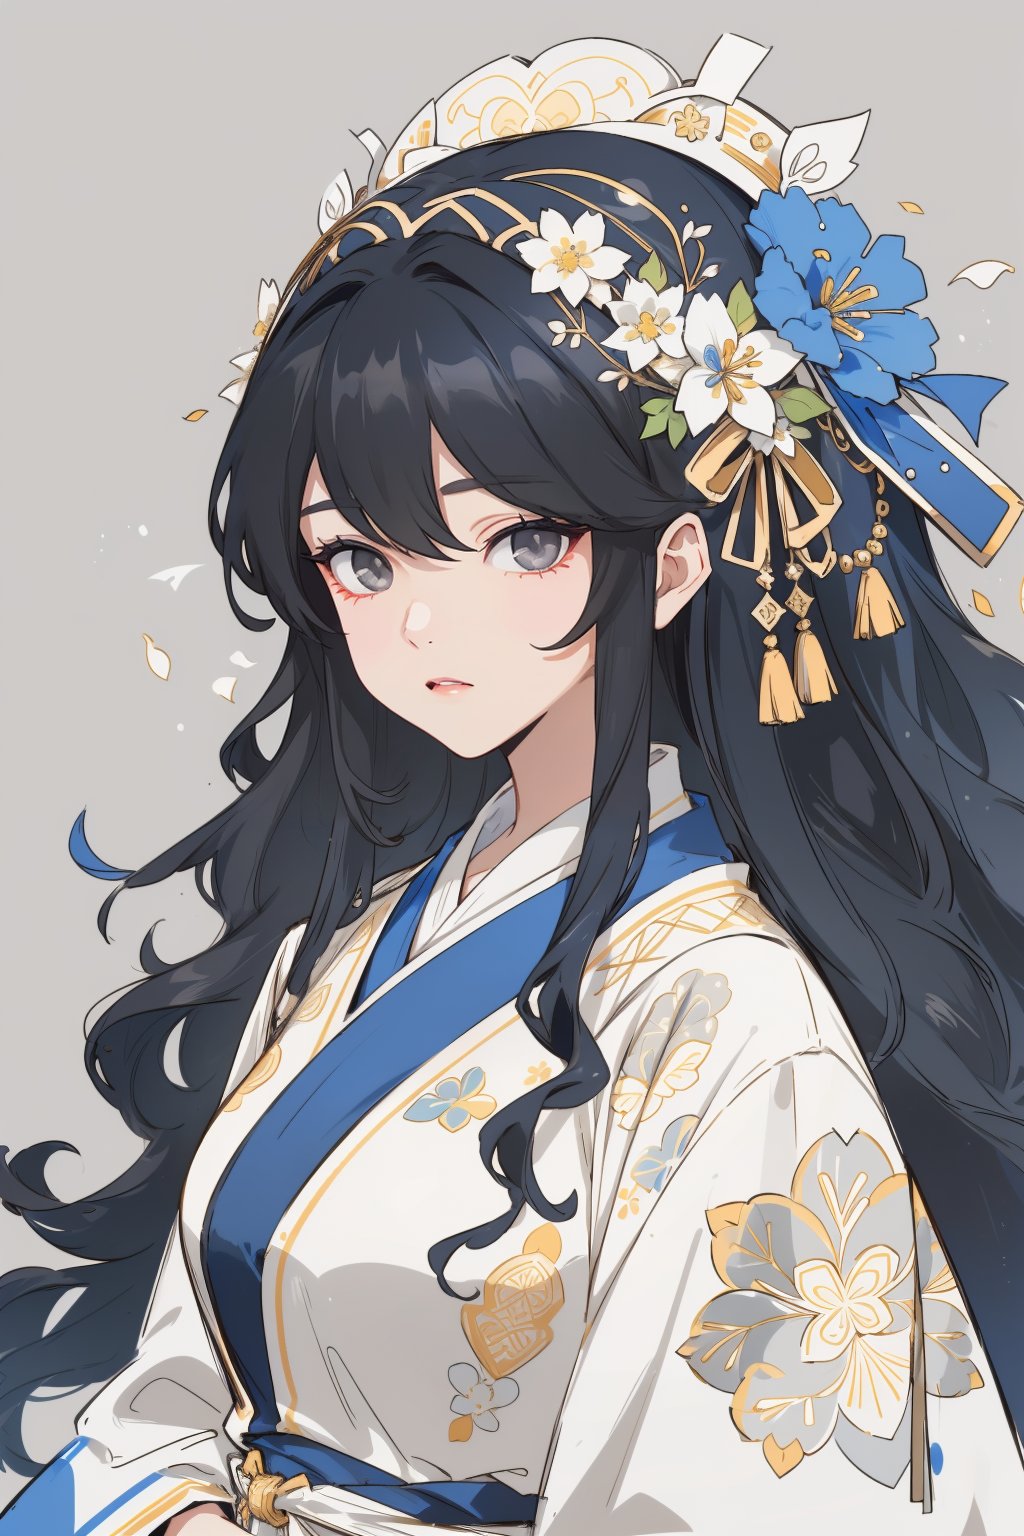 (masterpiece, best quality, highres:1.3), (Gray eyes, black hair, medium hair, wavy hair, hair between eyes, 1girl, small breasts)  hair adorned with floral decorations. She wears a traditional blue and white hanfu, and appears surrounded by large, blooming flowers and leaves that complement the floral headpiece. The background is a deep, muted blue, which enhances the warm tones of the flowers and her attire. Her expression is serene and her eyes are large and expressive, adding to the gentle and elegant feel of the artwork.,sketch style